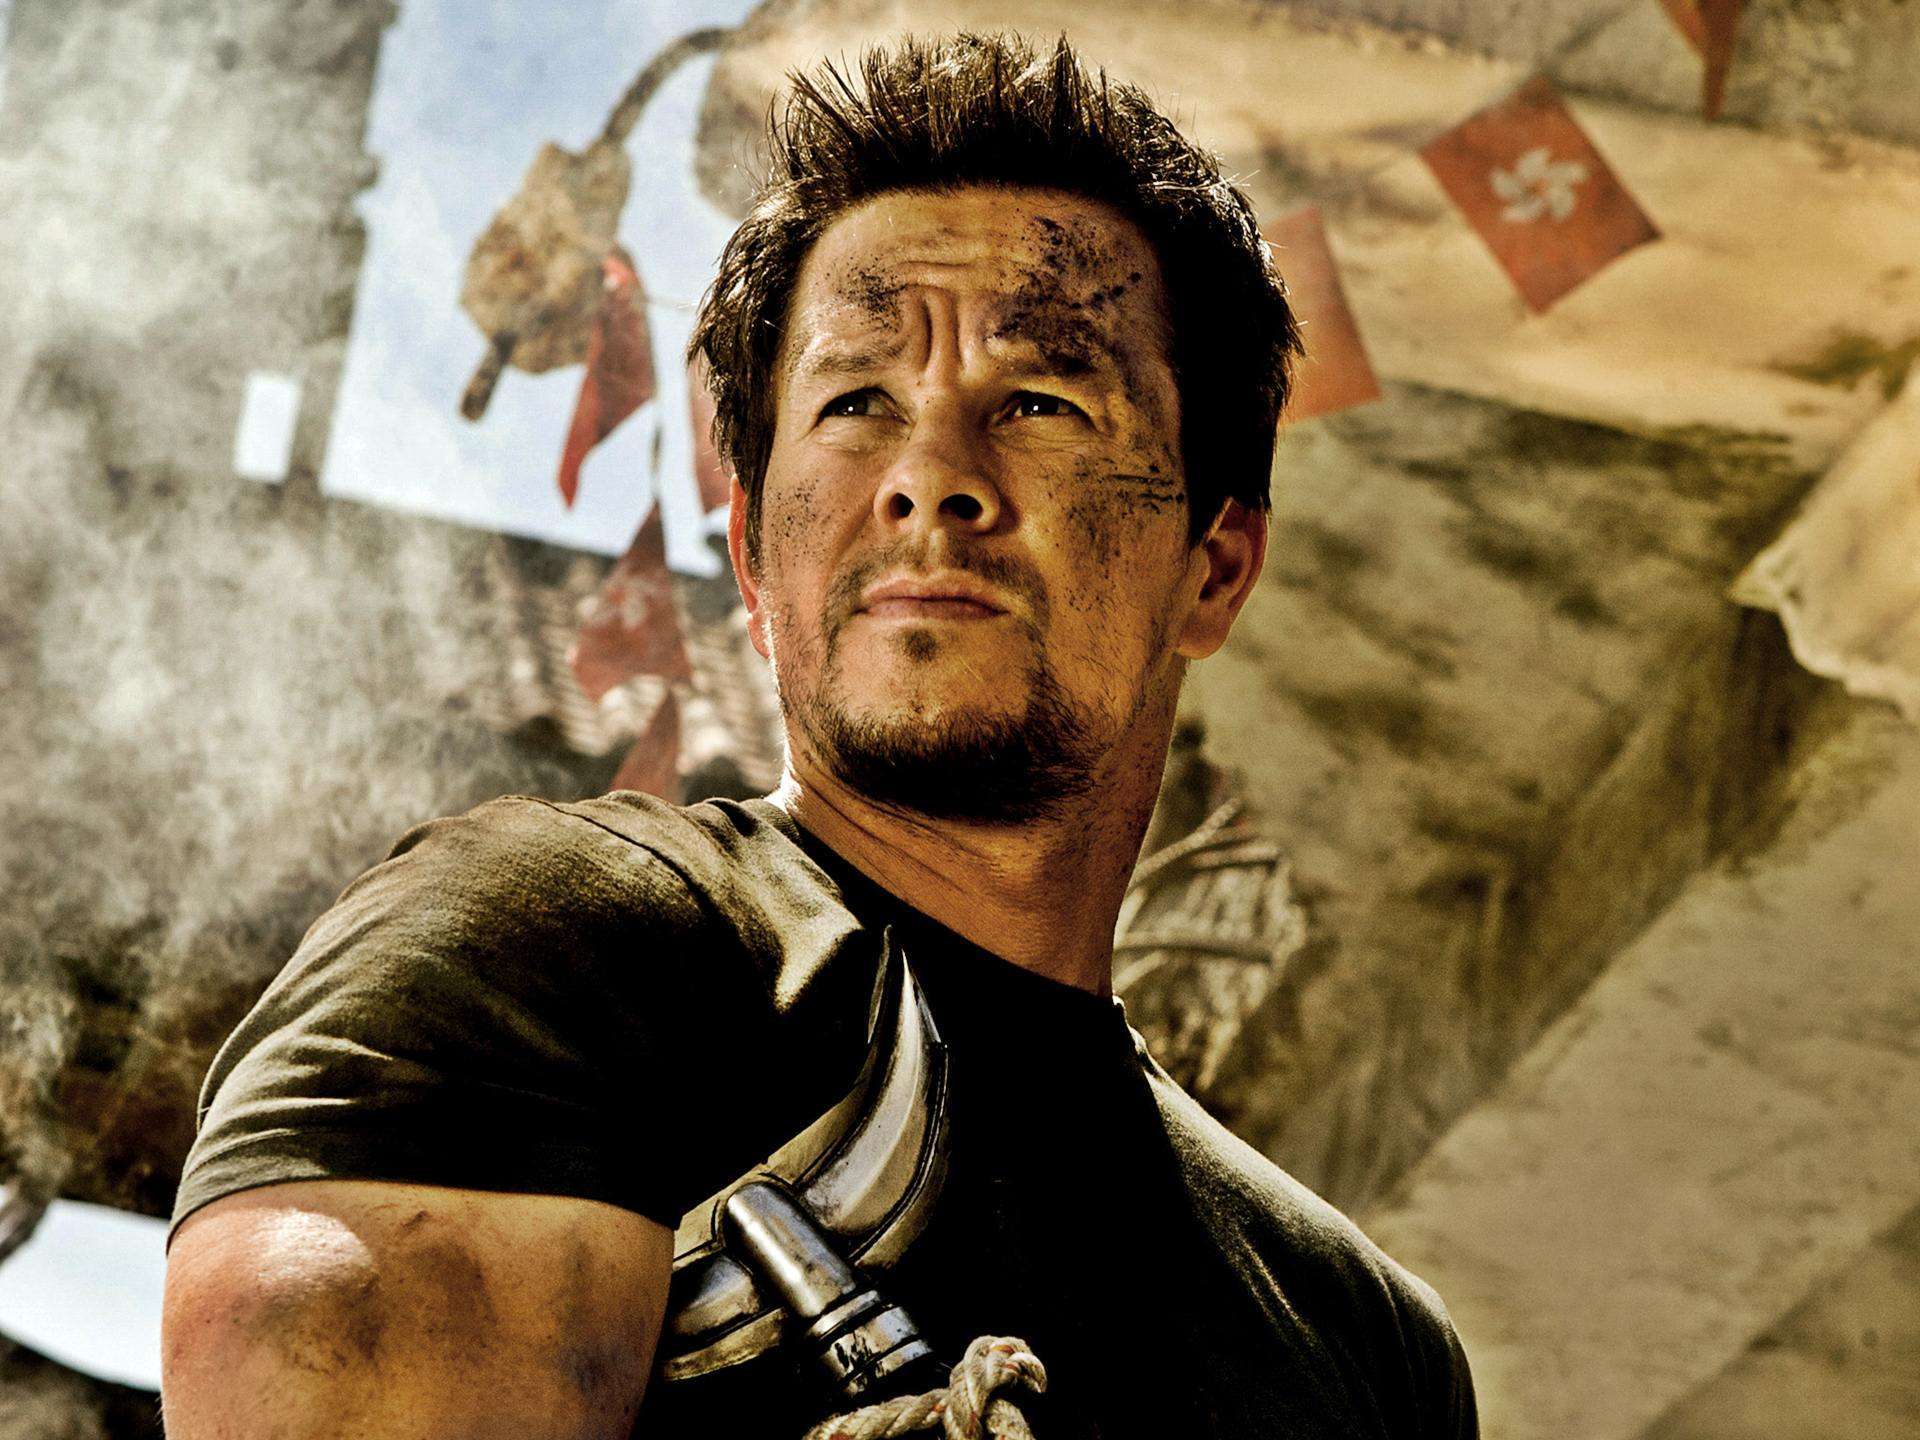 Get Cast in Mark Wahlberg's Transformers: The Last Knight